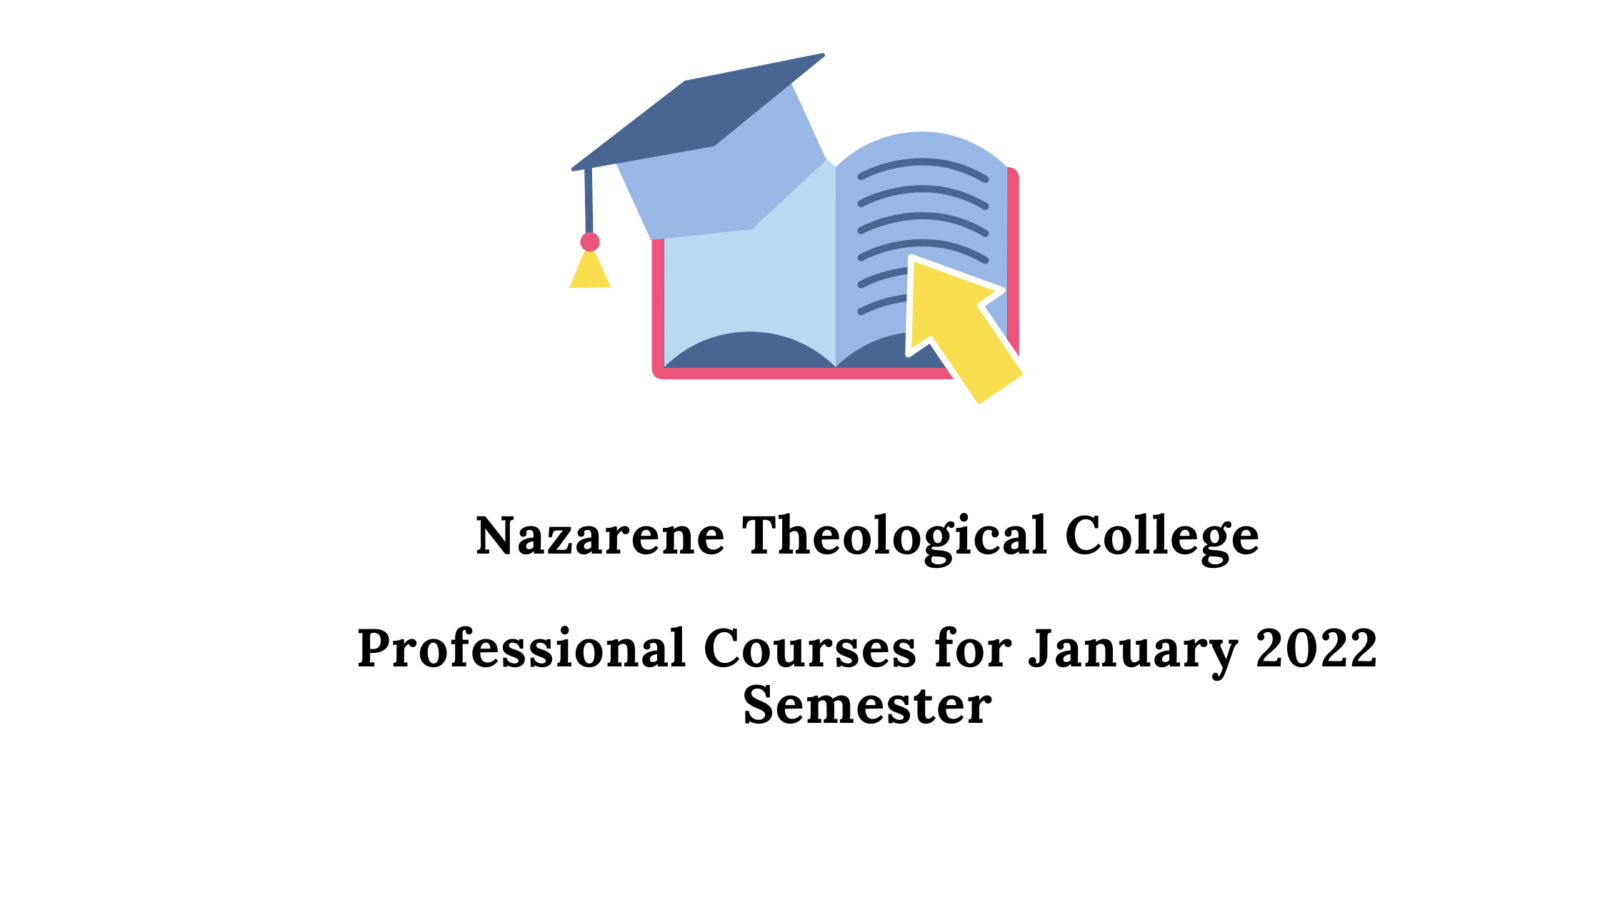 Professional Courses for January 2022 Semester